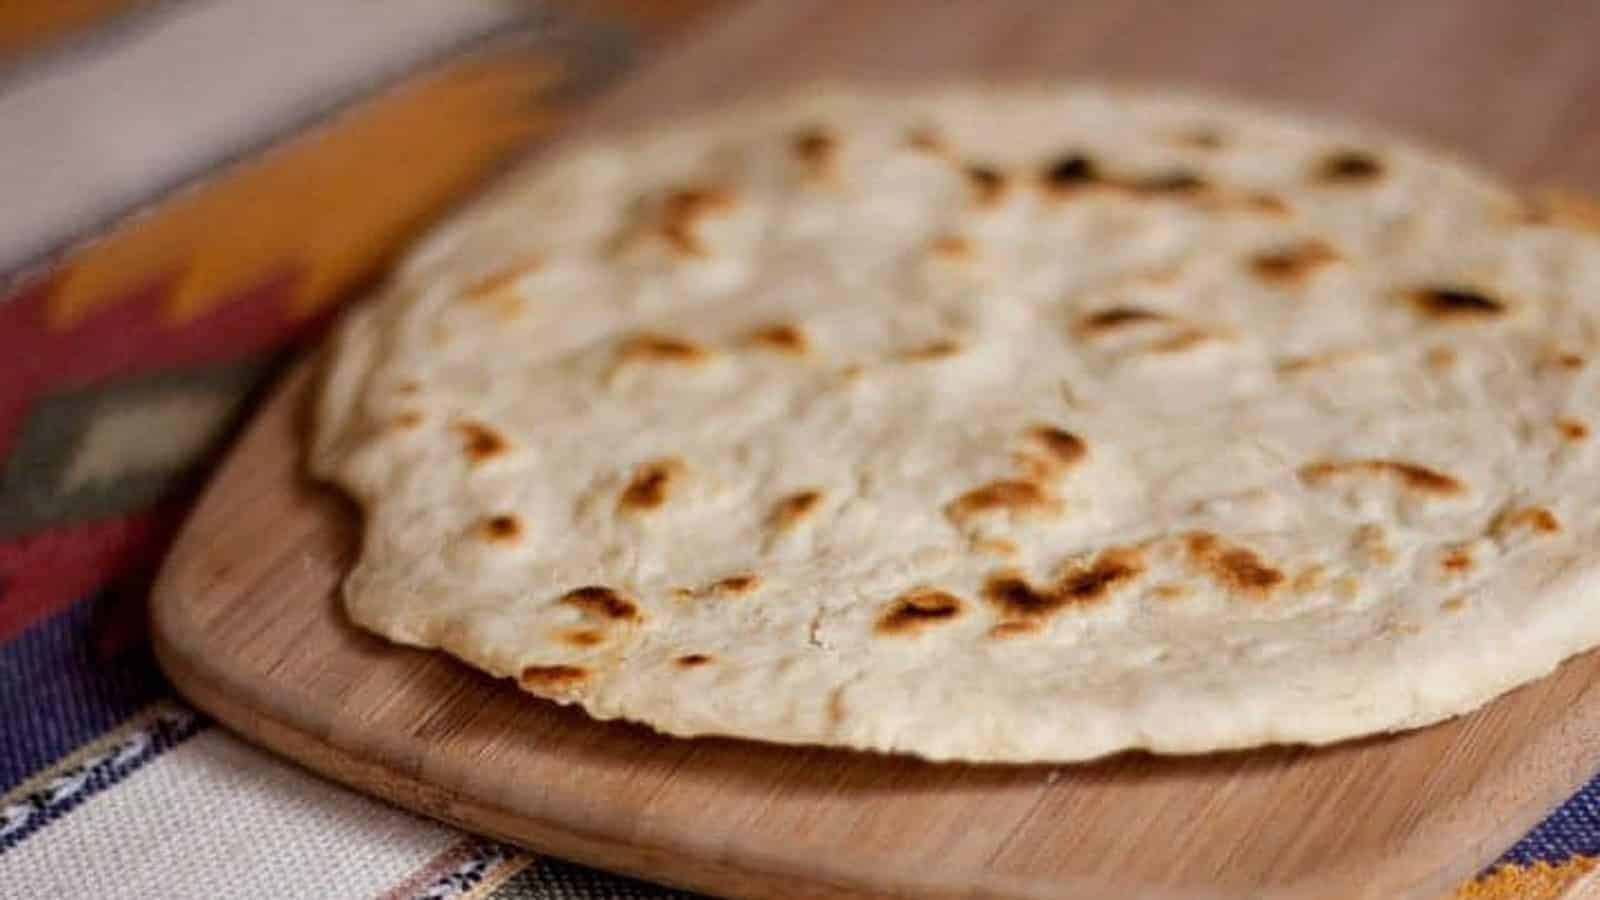 Flour tortillas stacked on a plate.